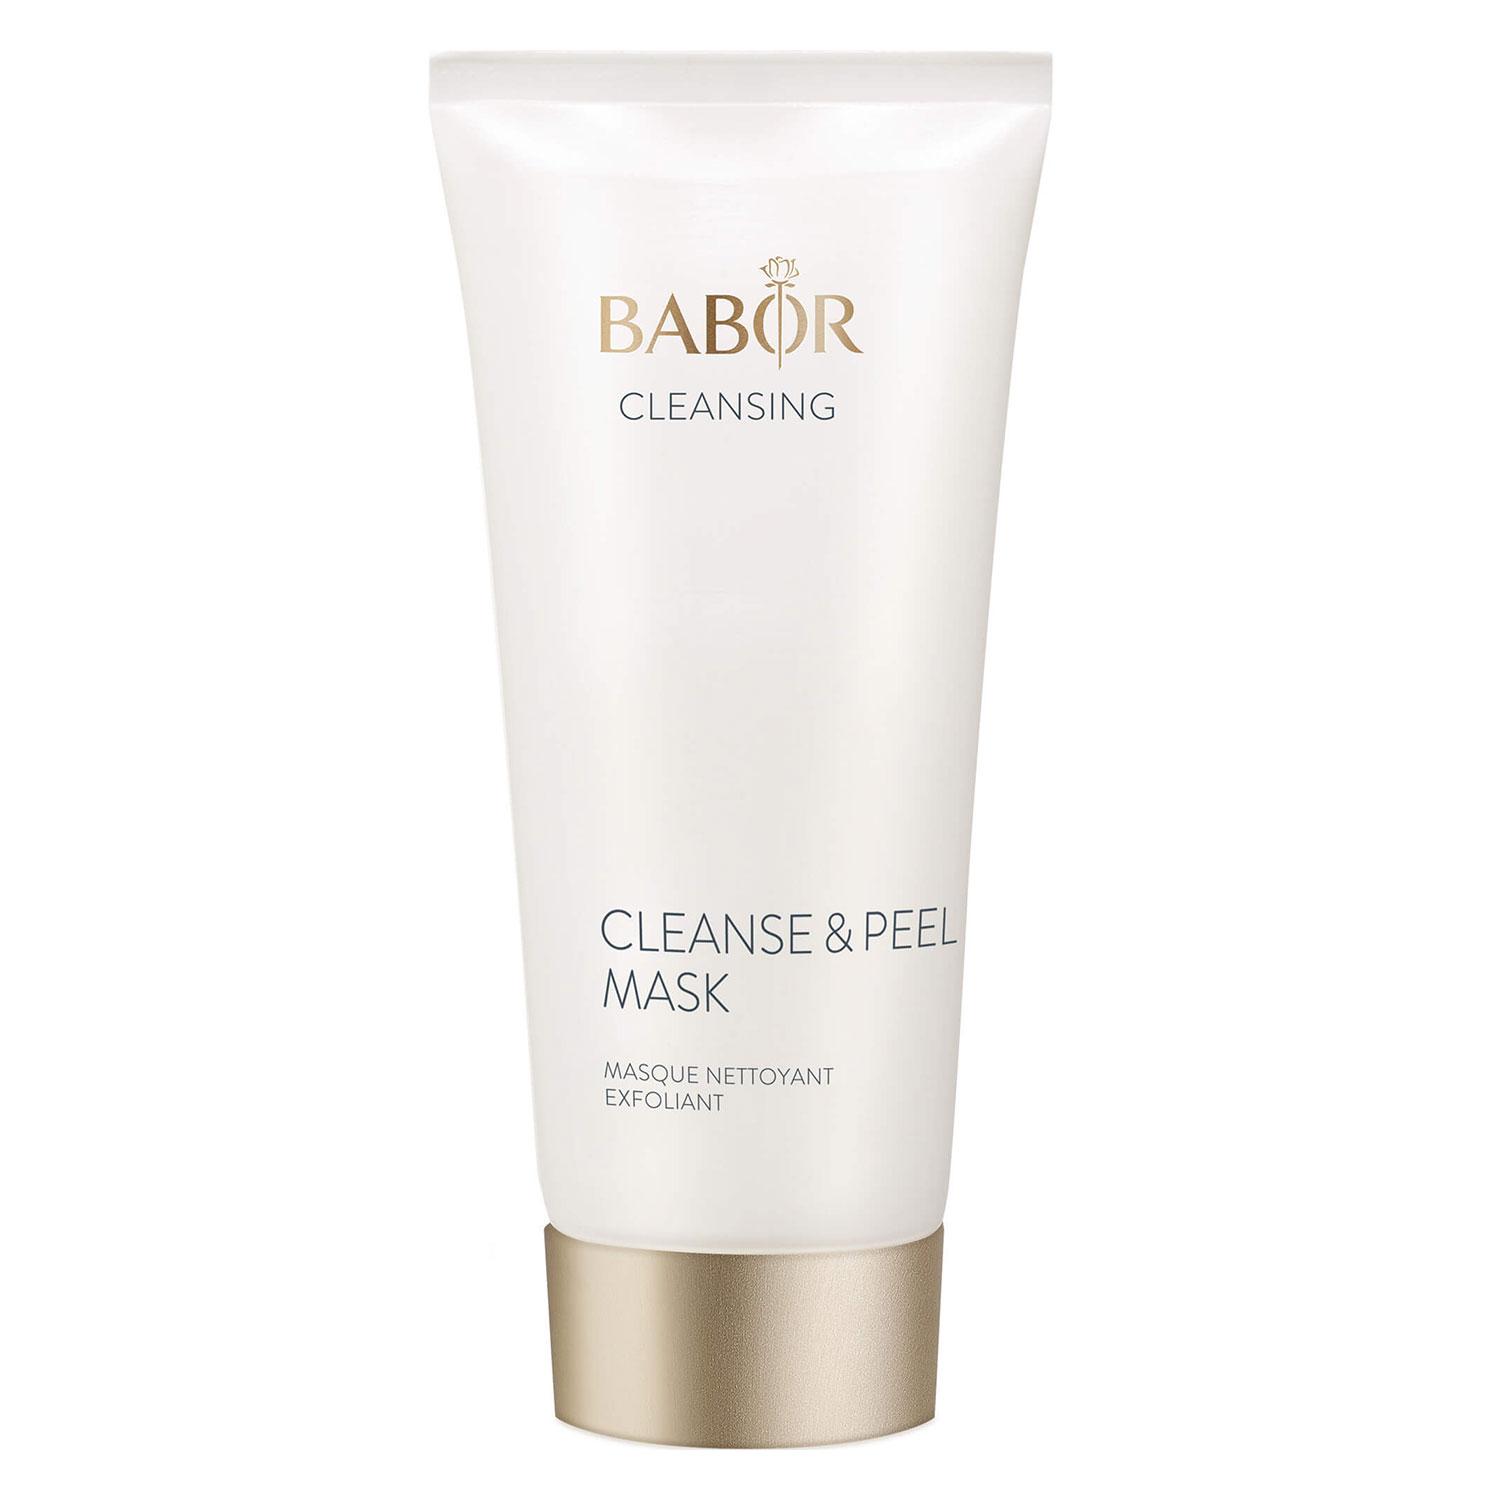 BABOR CLEANSING - Cleanse & Peel Mask